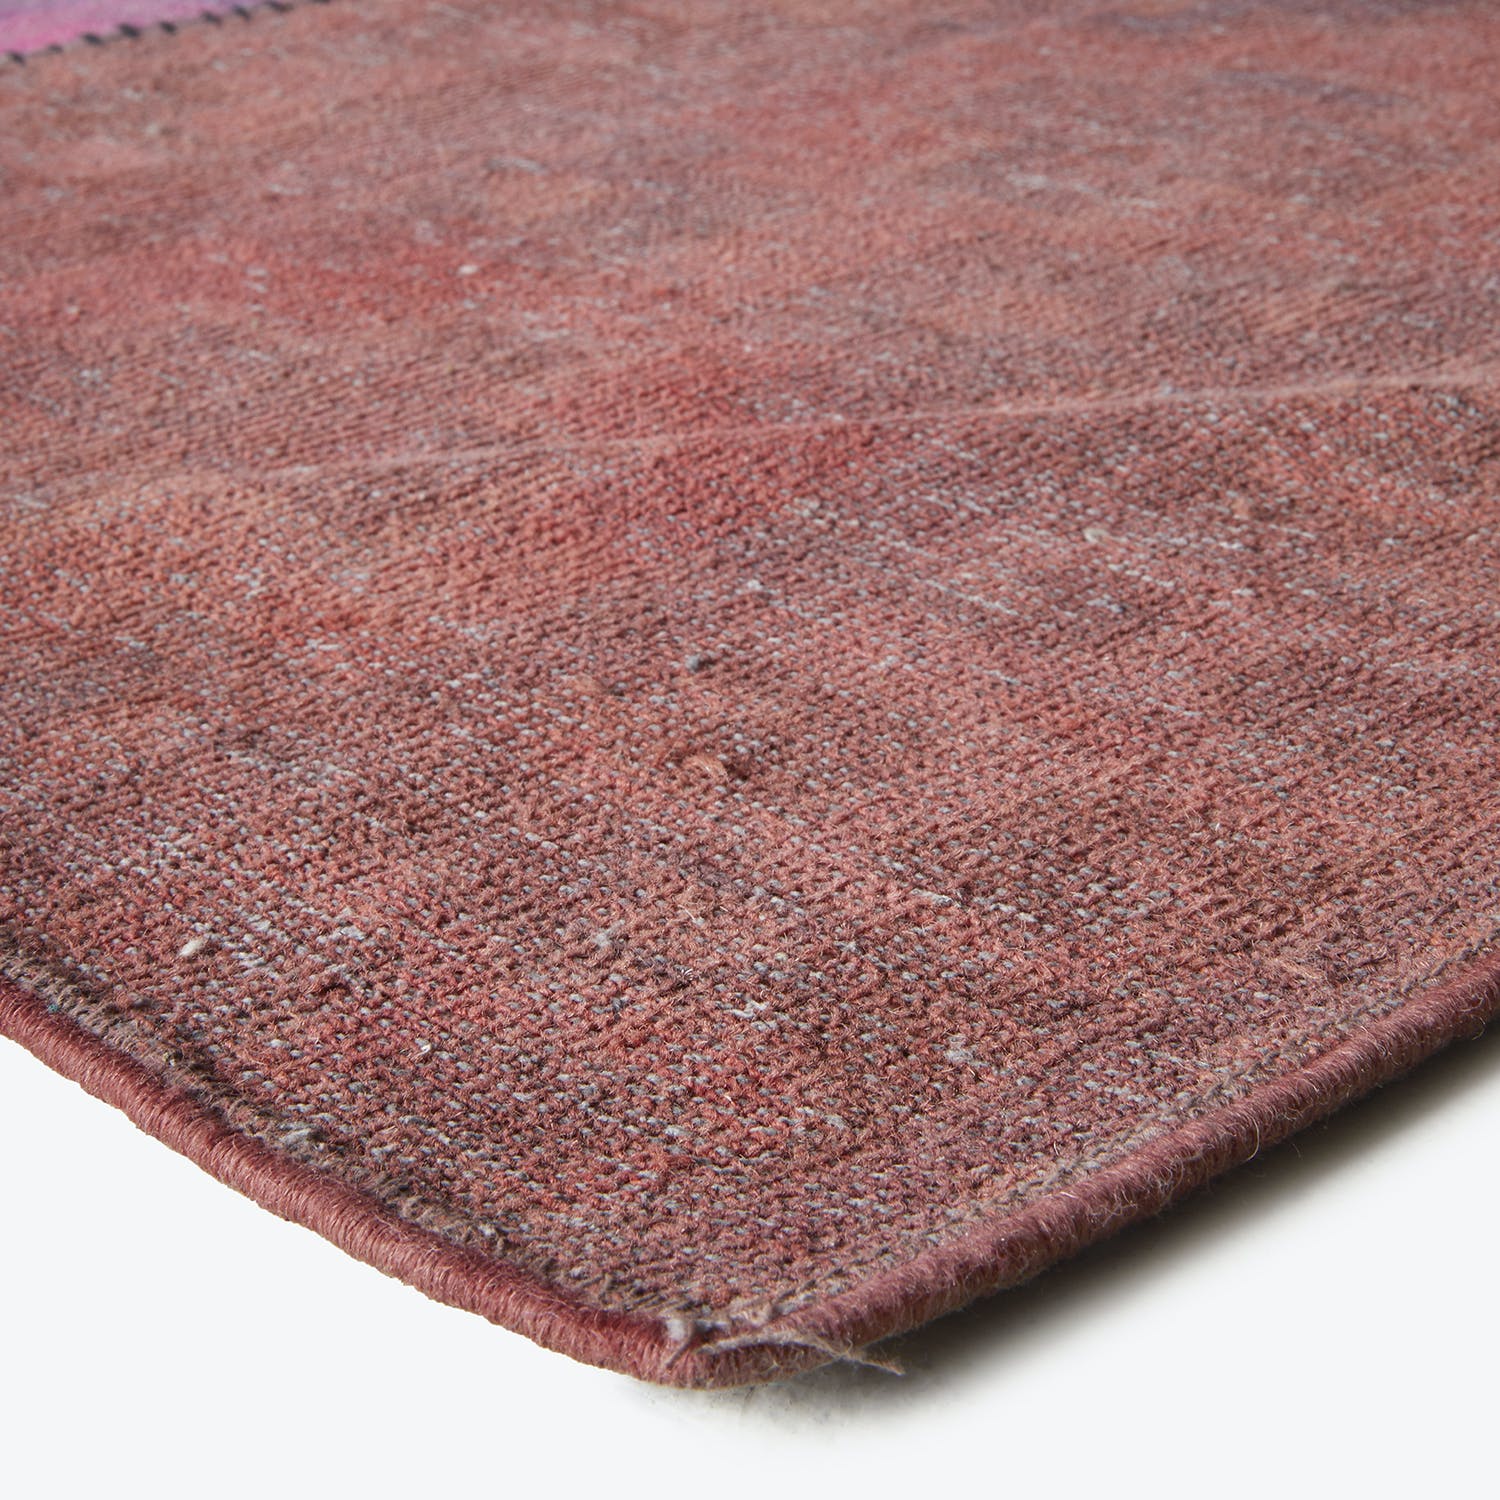 Close-up of a used pink and red area rug.